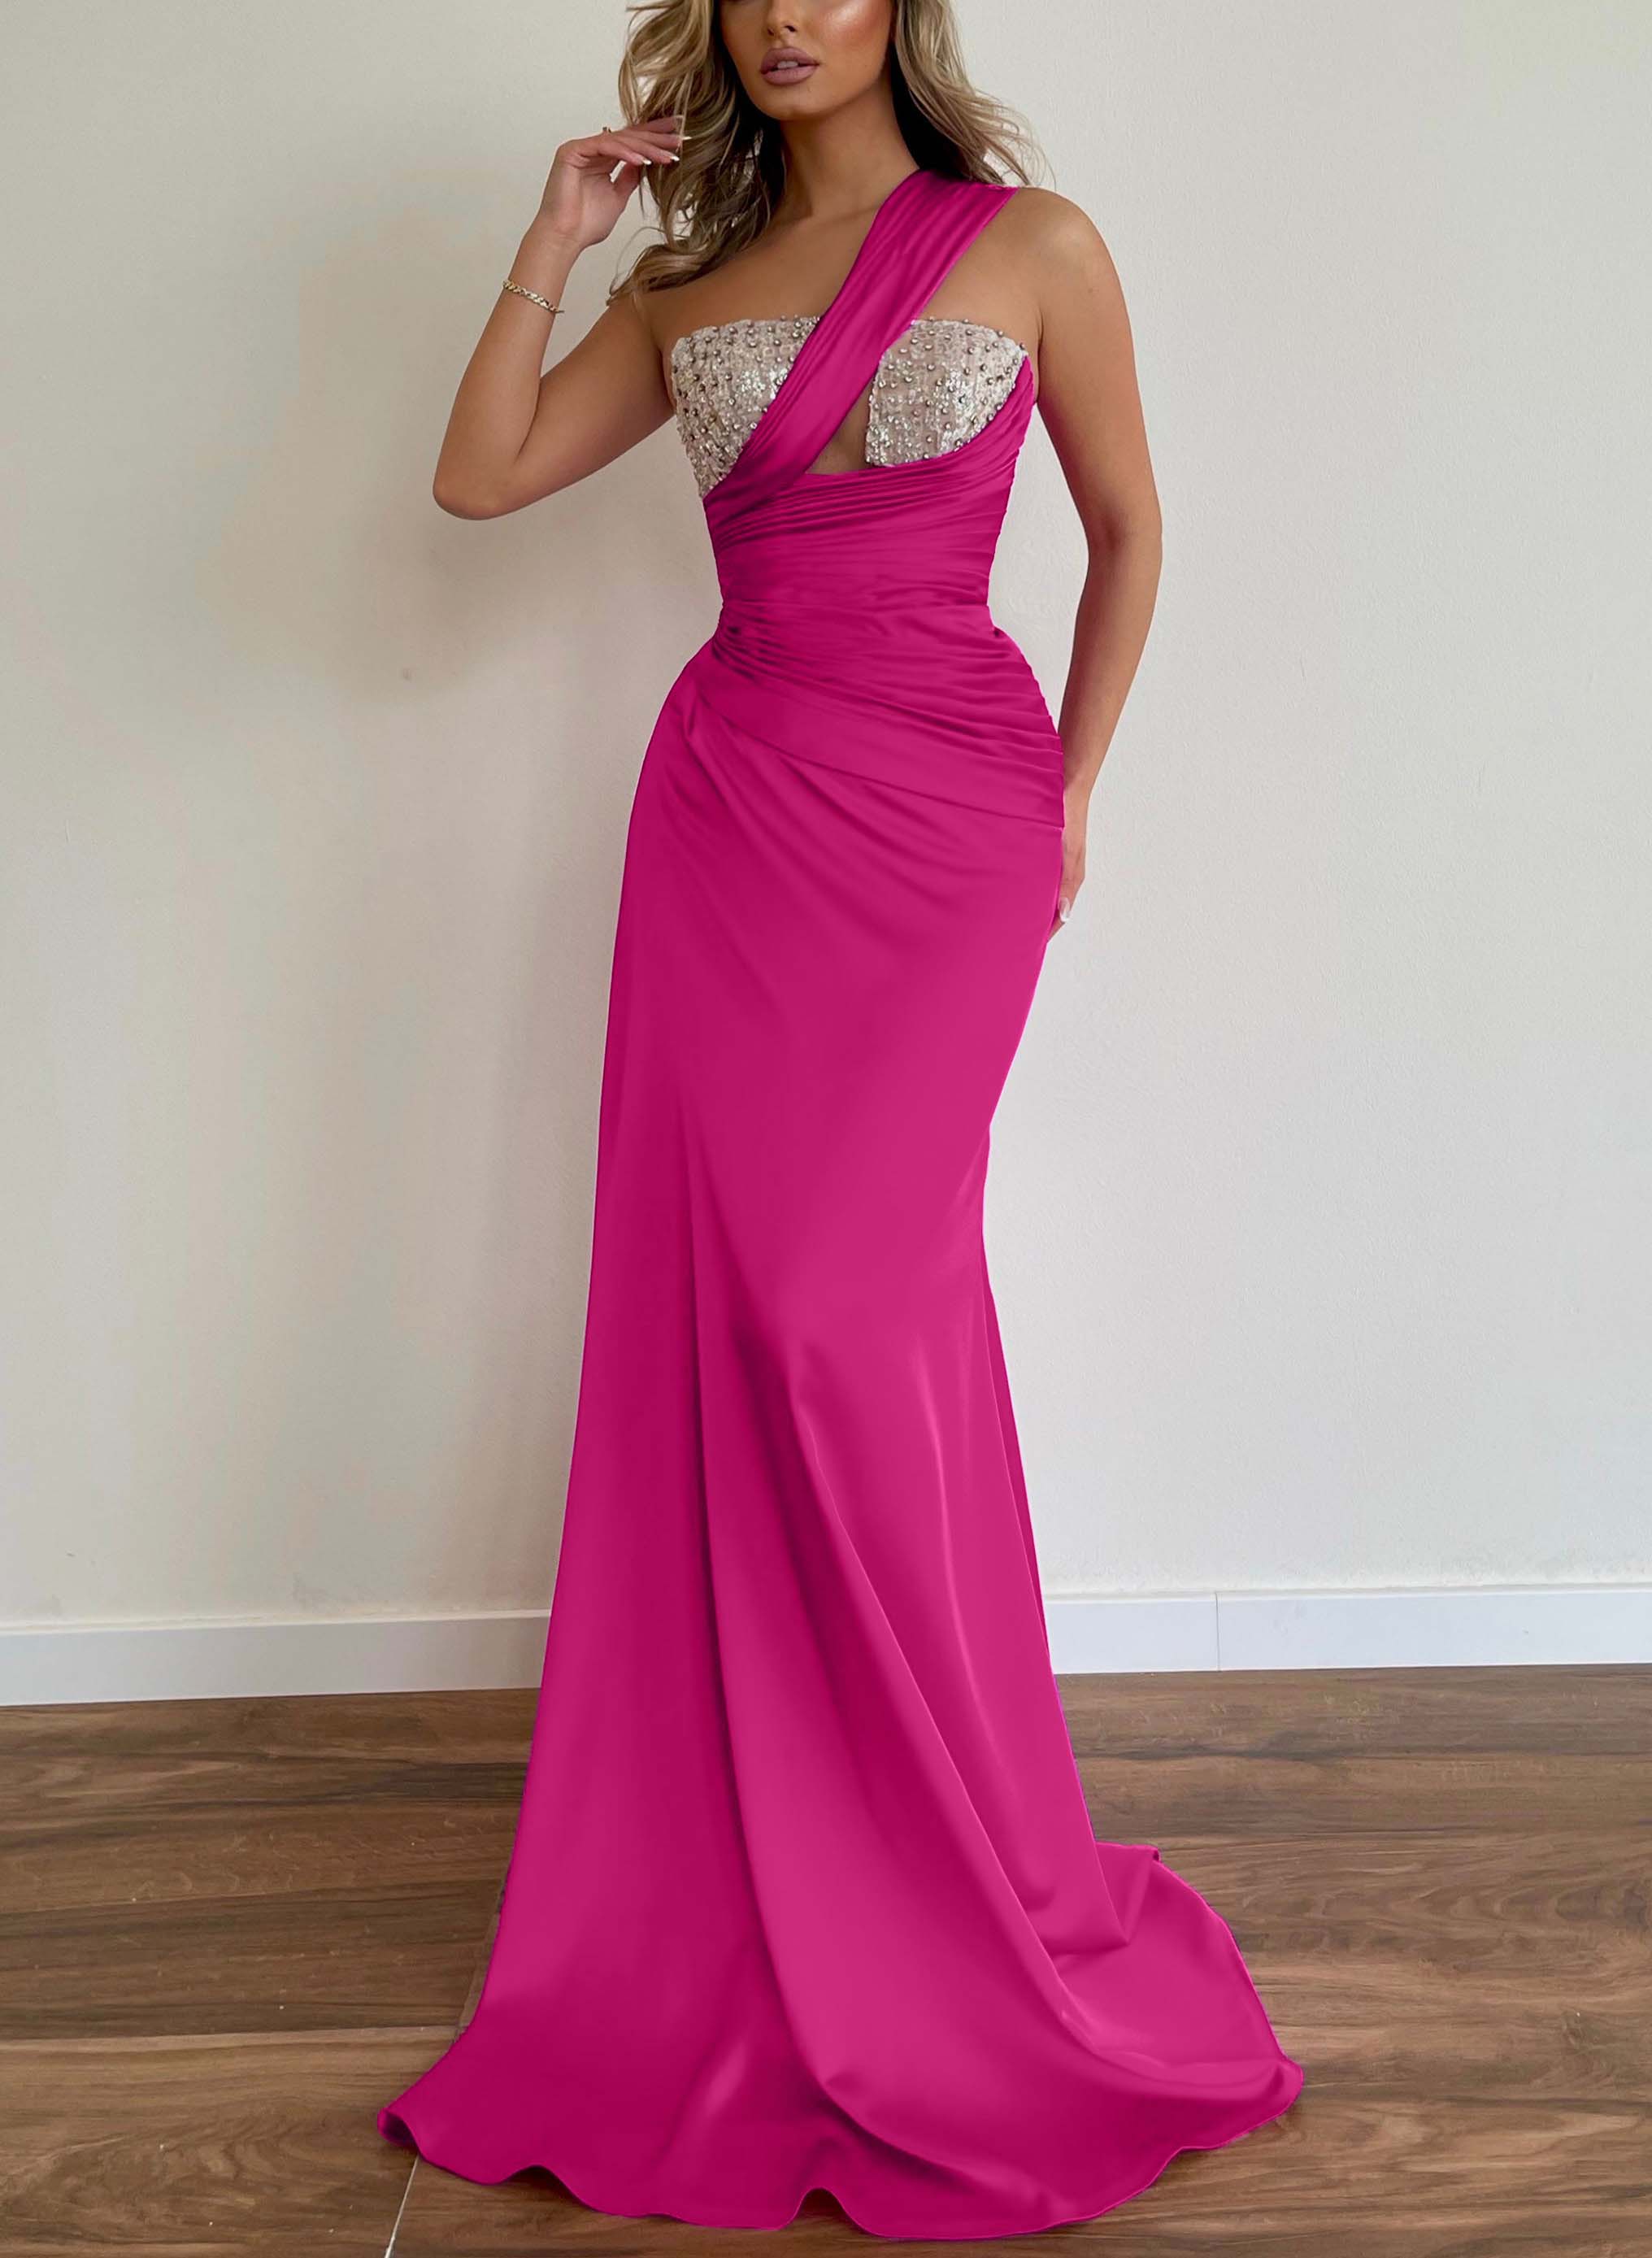 Sparkly Beading One-Shoulder Prom Dresses With Sheath/Column